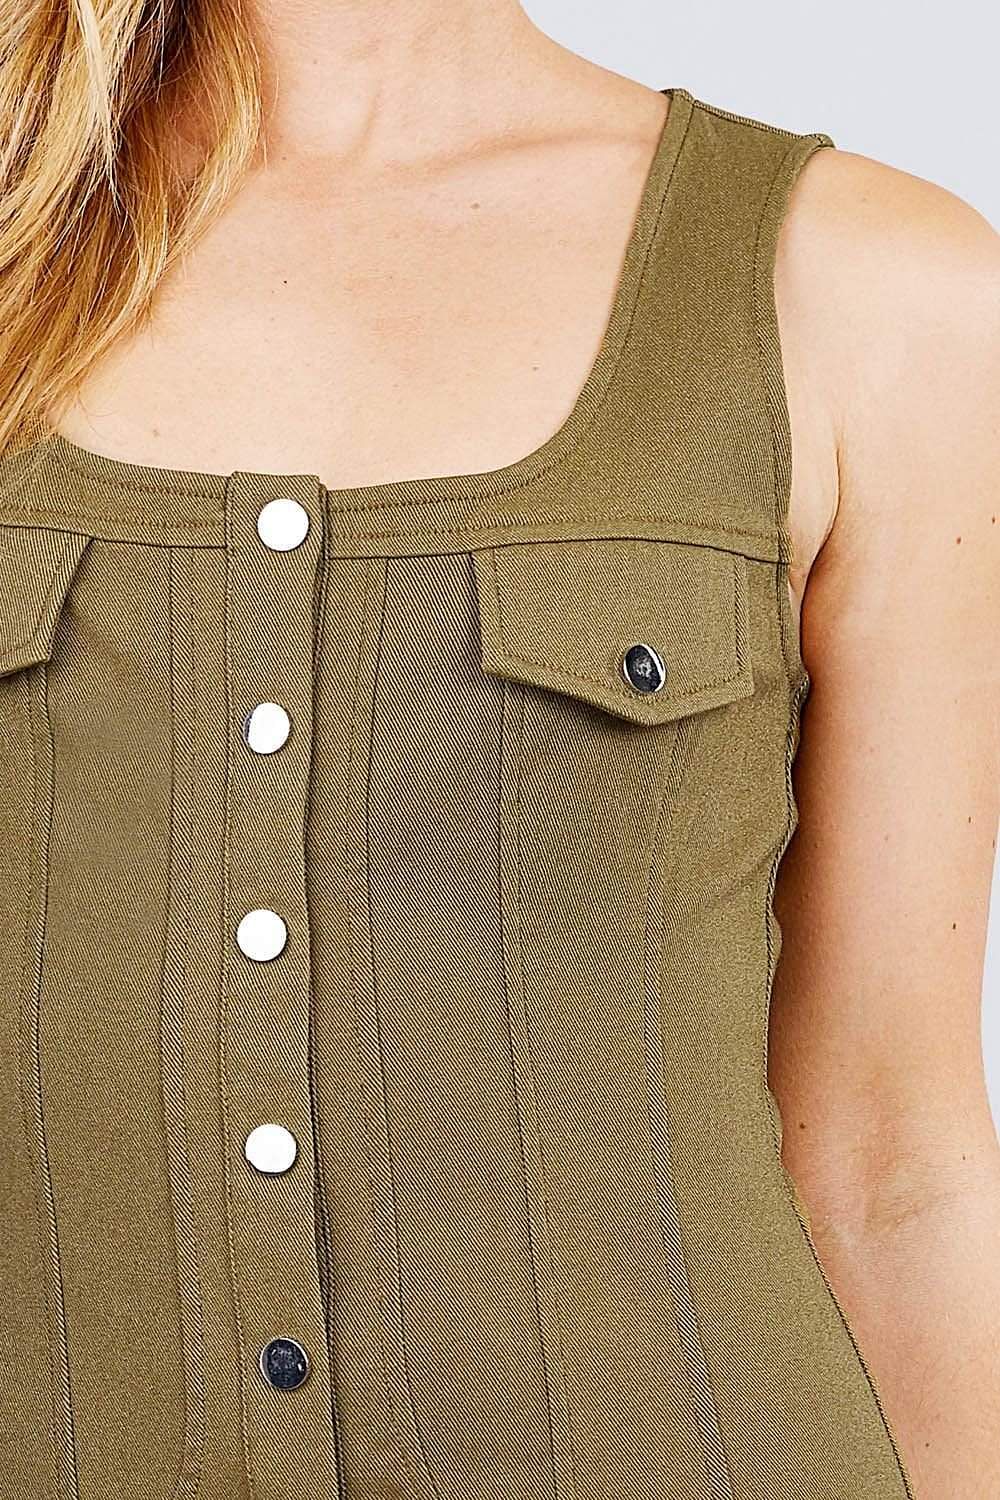 Olive Sleeveless Mini Dress With Front Buttons - Shopping Therapy M